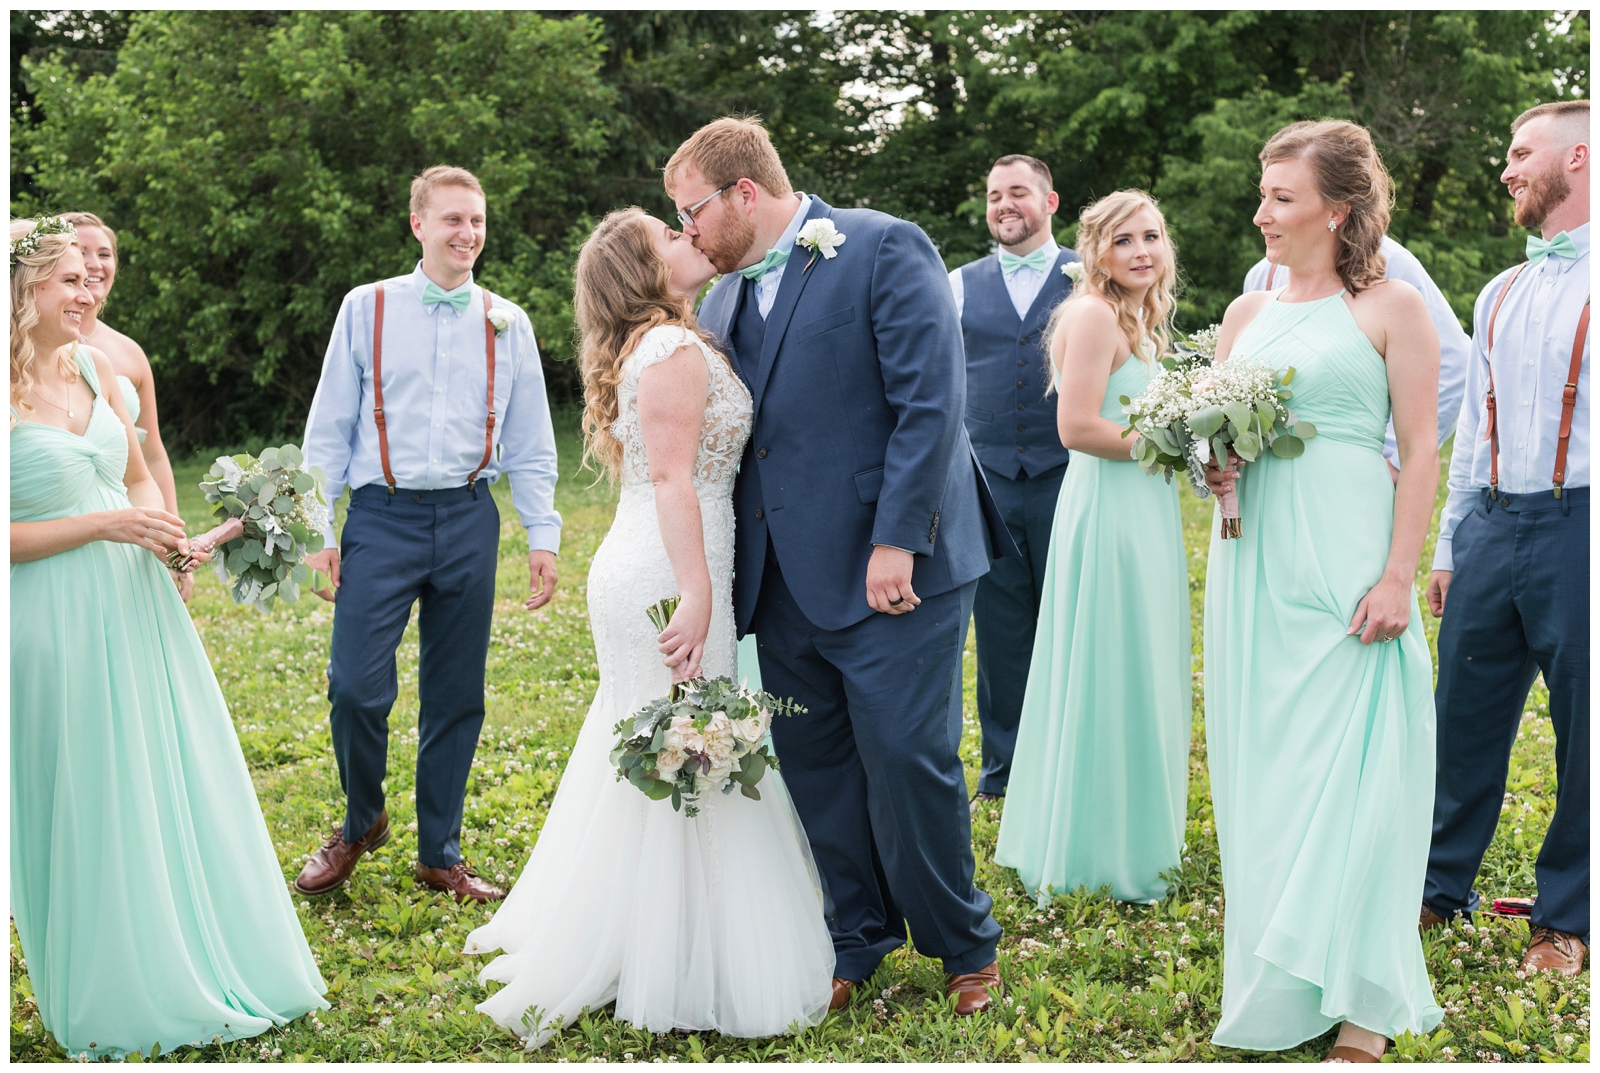 groom kisses bride with bridal party in mint gowns around them